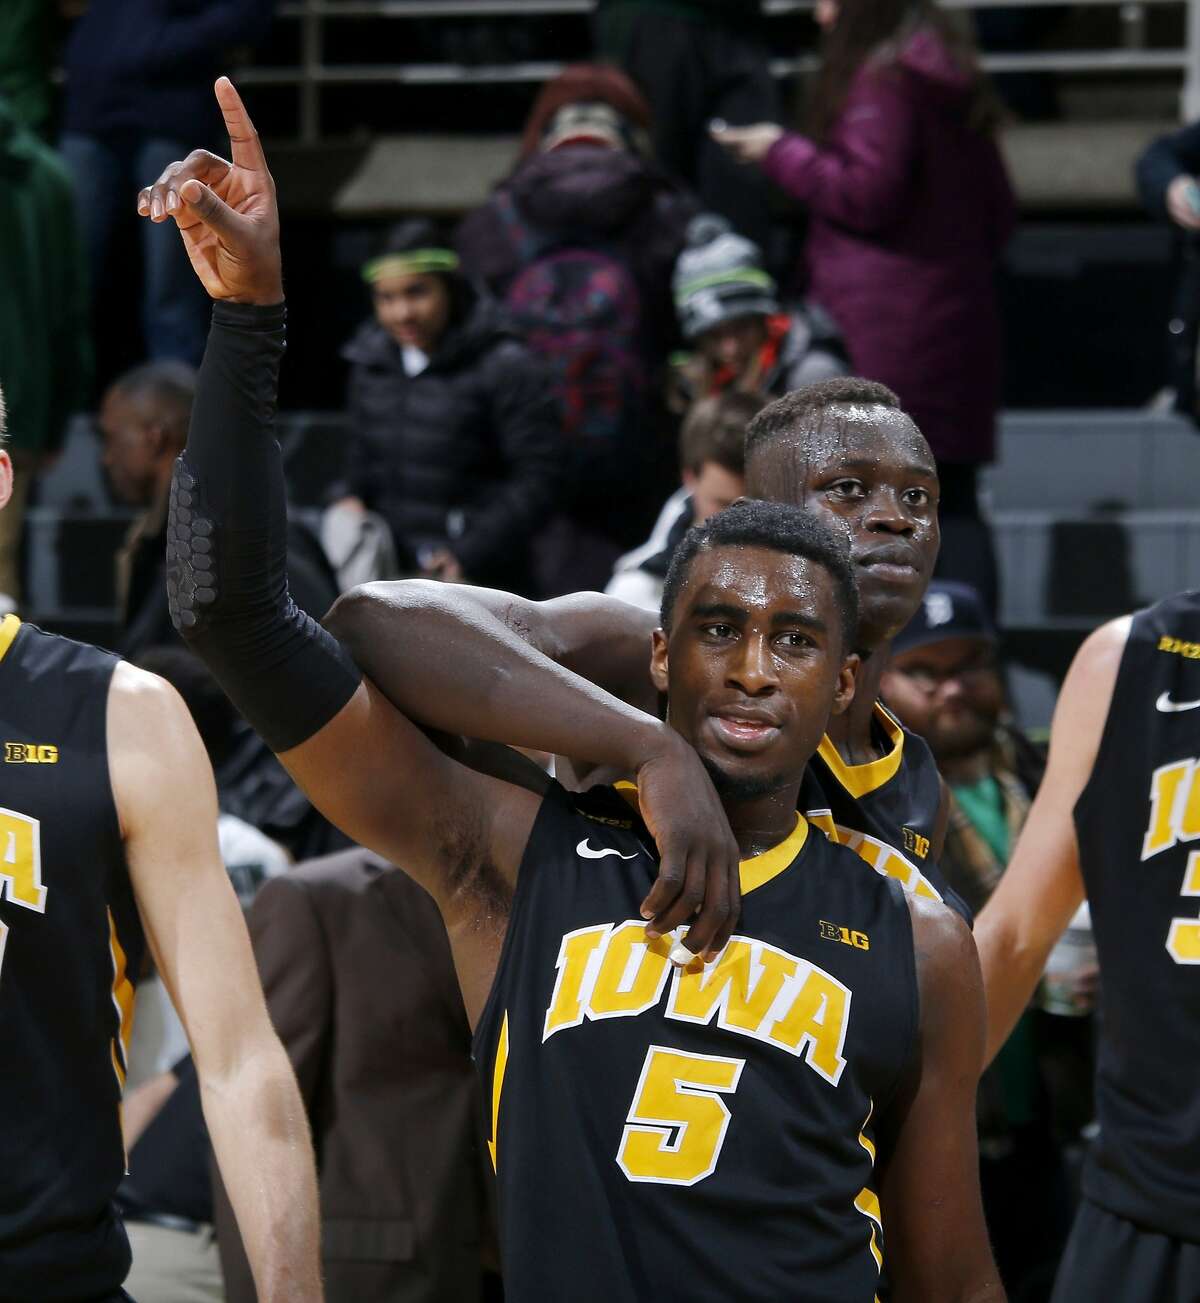 Iowa's Anthony Clemmons (5) and Peter Jok celebrate following a 76-59 win over Michigan State in an NCAA college basketball game Thursday, Jan. 14, 2016, in East Lansing, Mich. (AP Photo/Al Goldis)